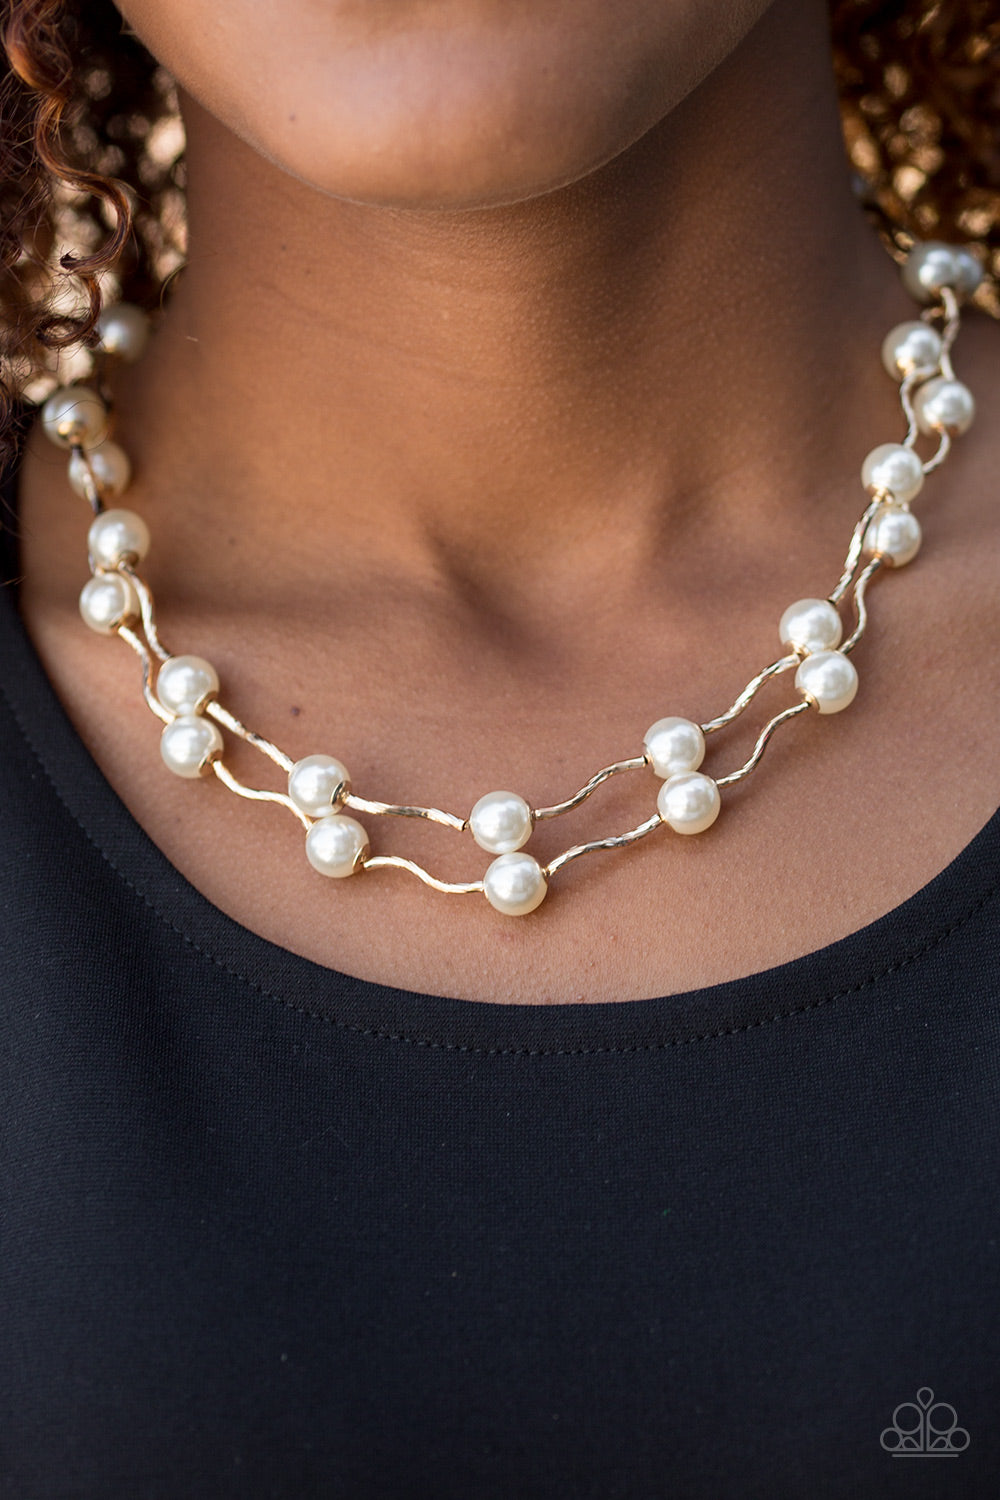 Ahead of the FAME - white - Paparazzi necklace